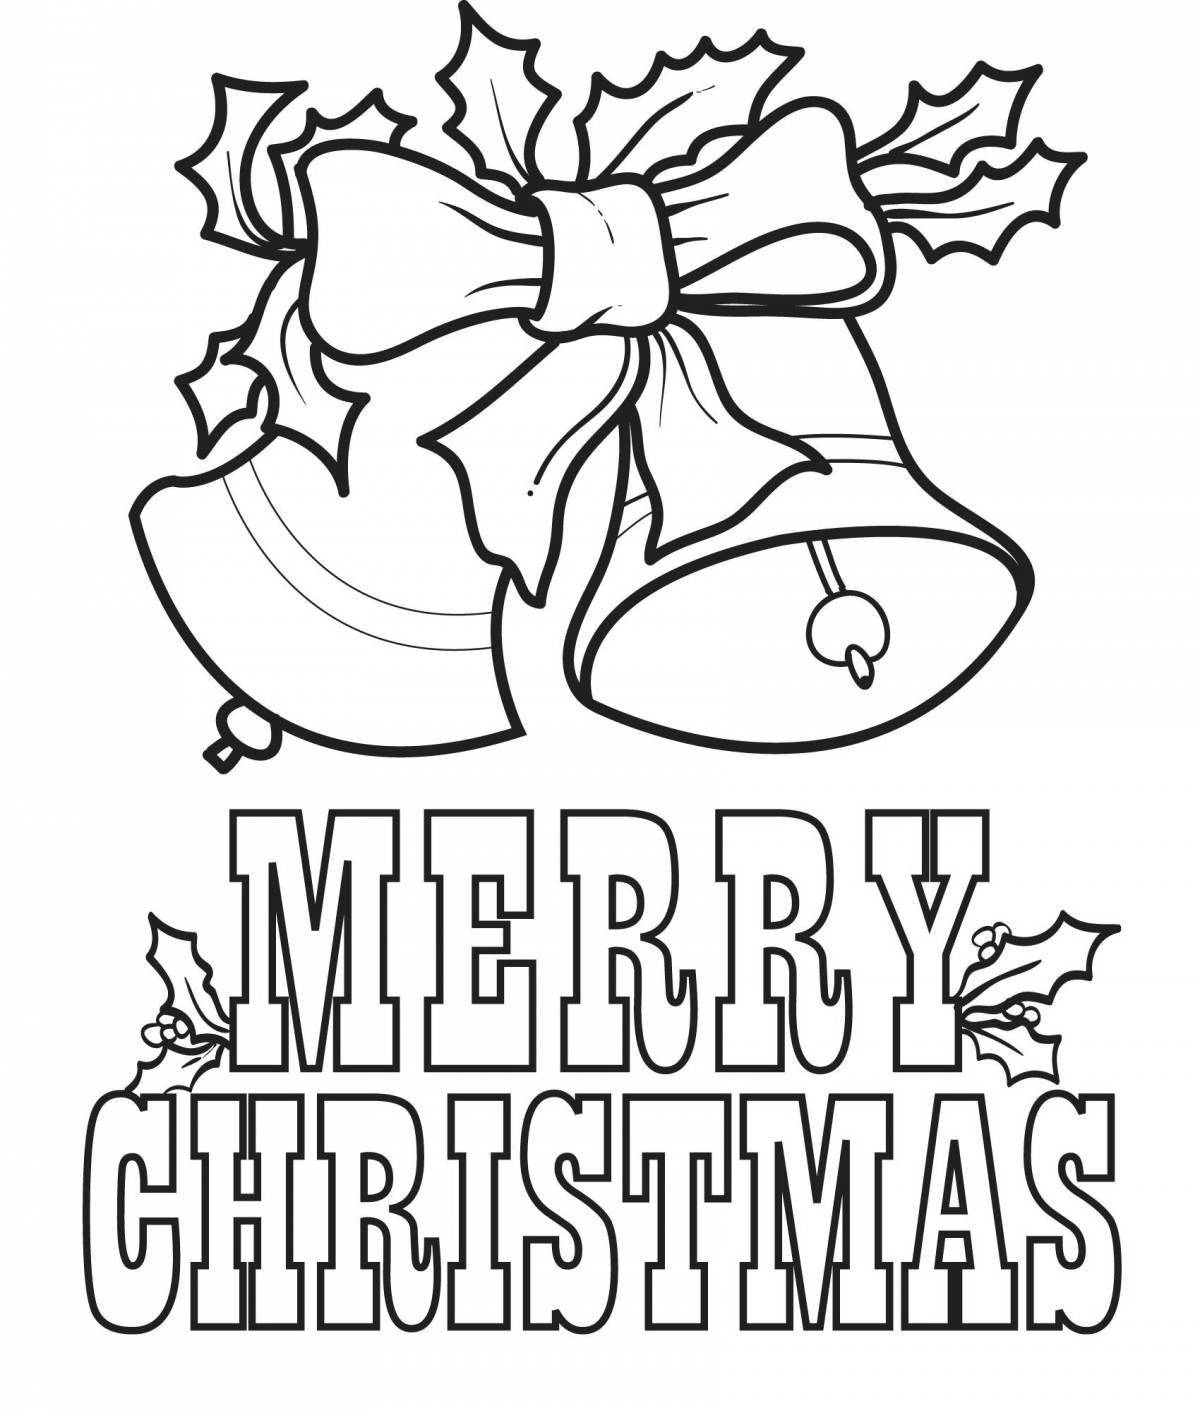 Merry Christmas glamorous coloring book